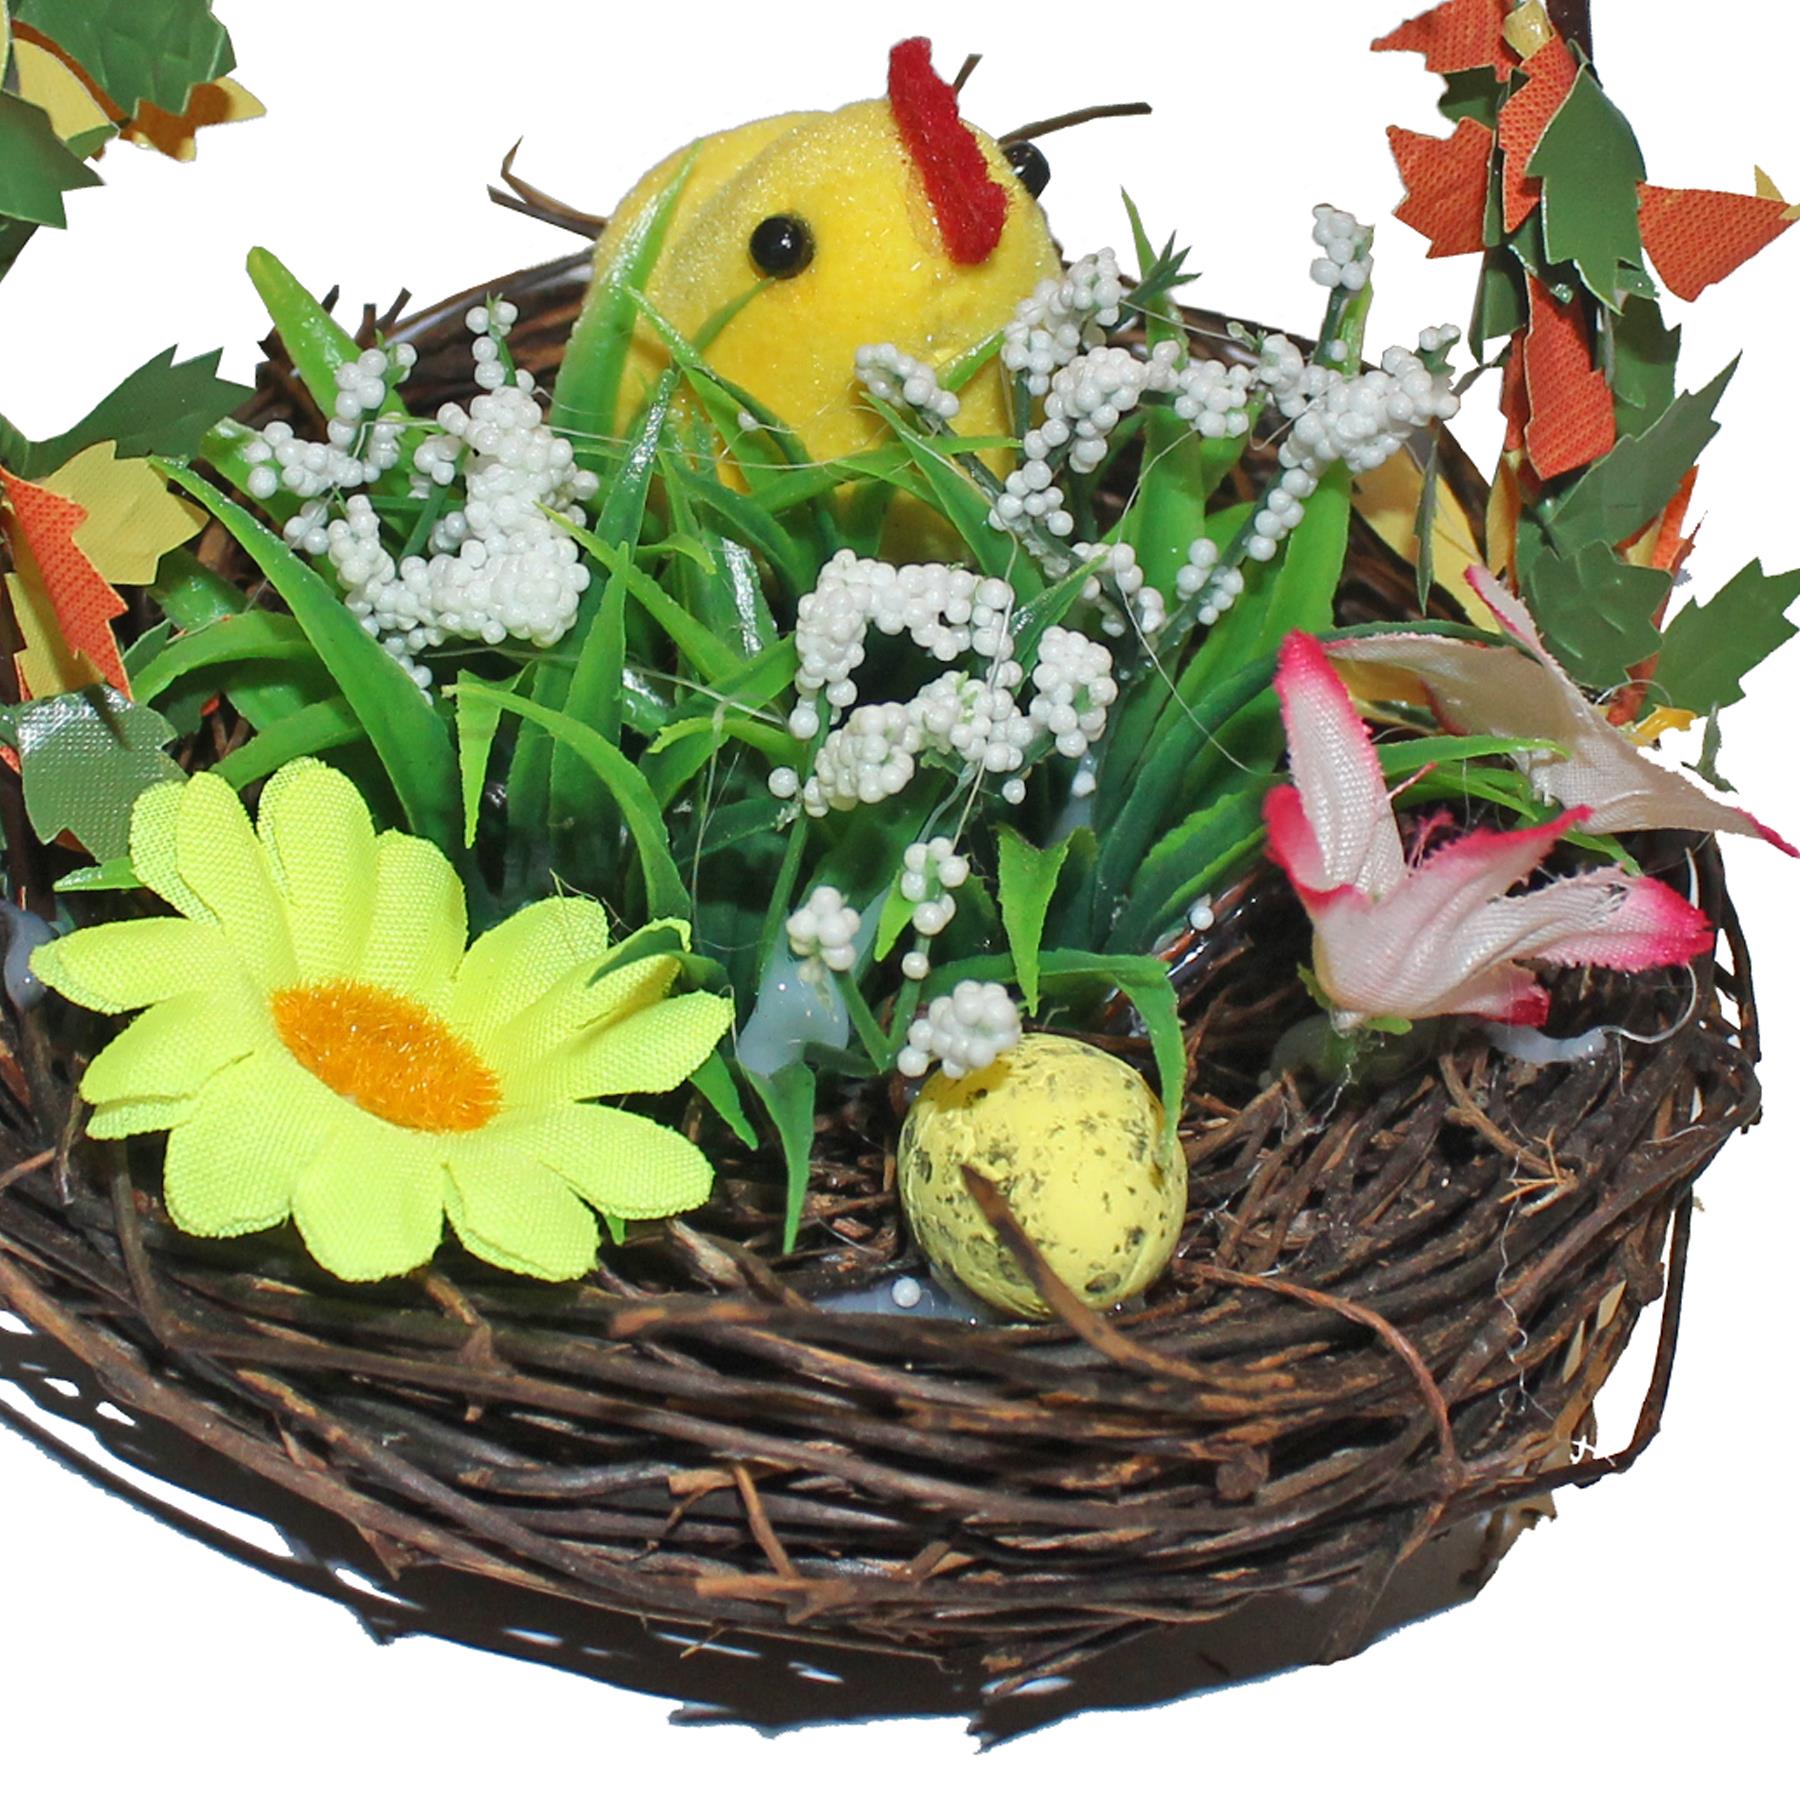 Easter Decorations, Bonnet Making, Arts and Crafts - Nest Basket with Chick